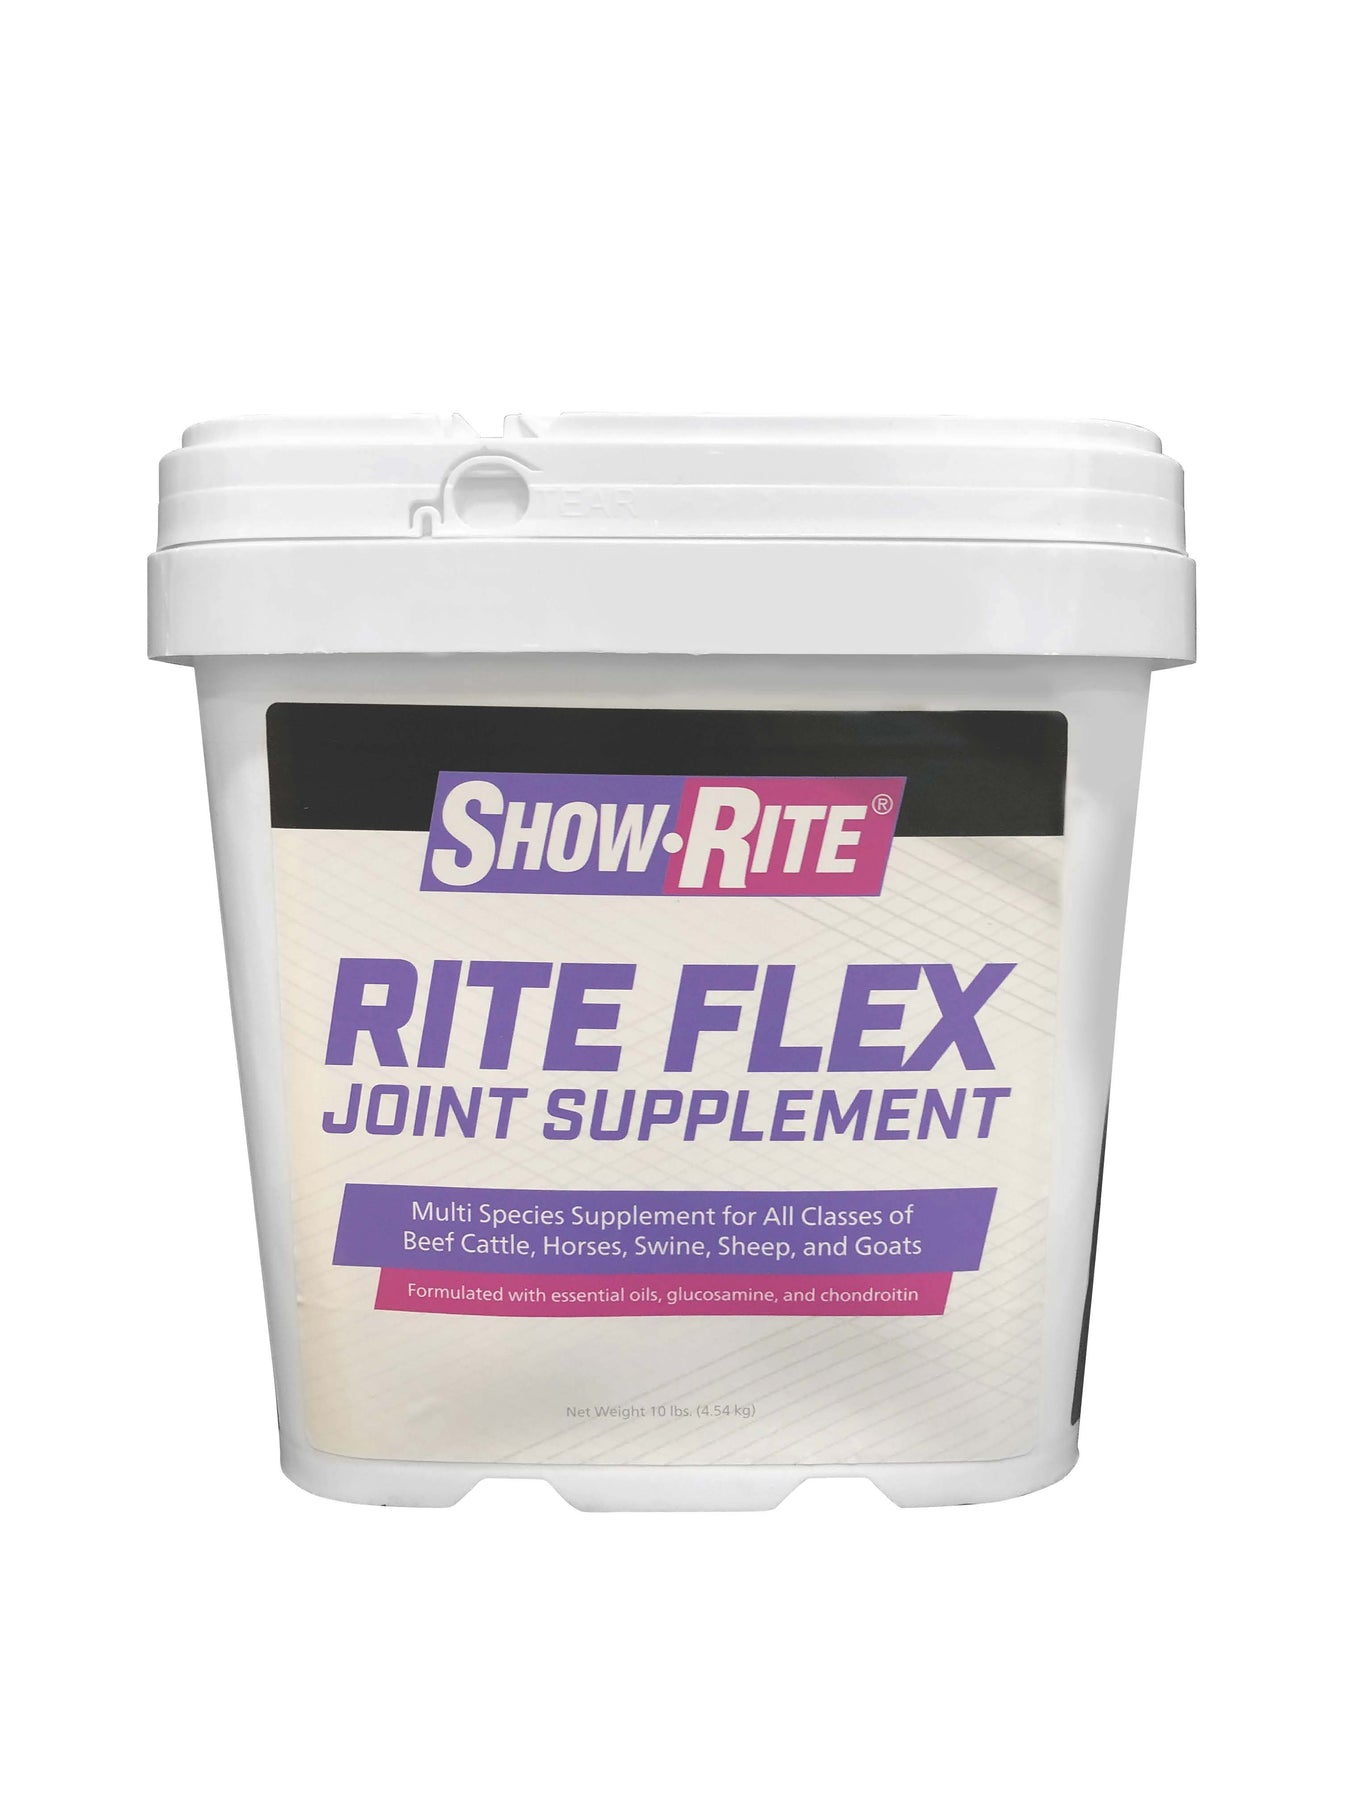 Horse Joint Supplements - Equine Joint Health